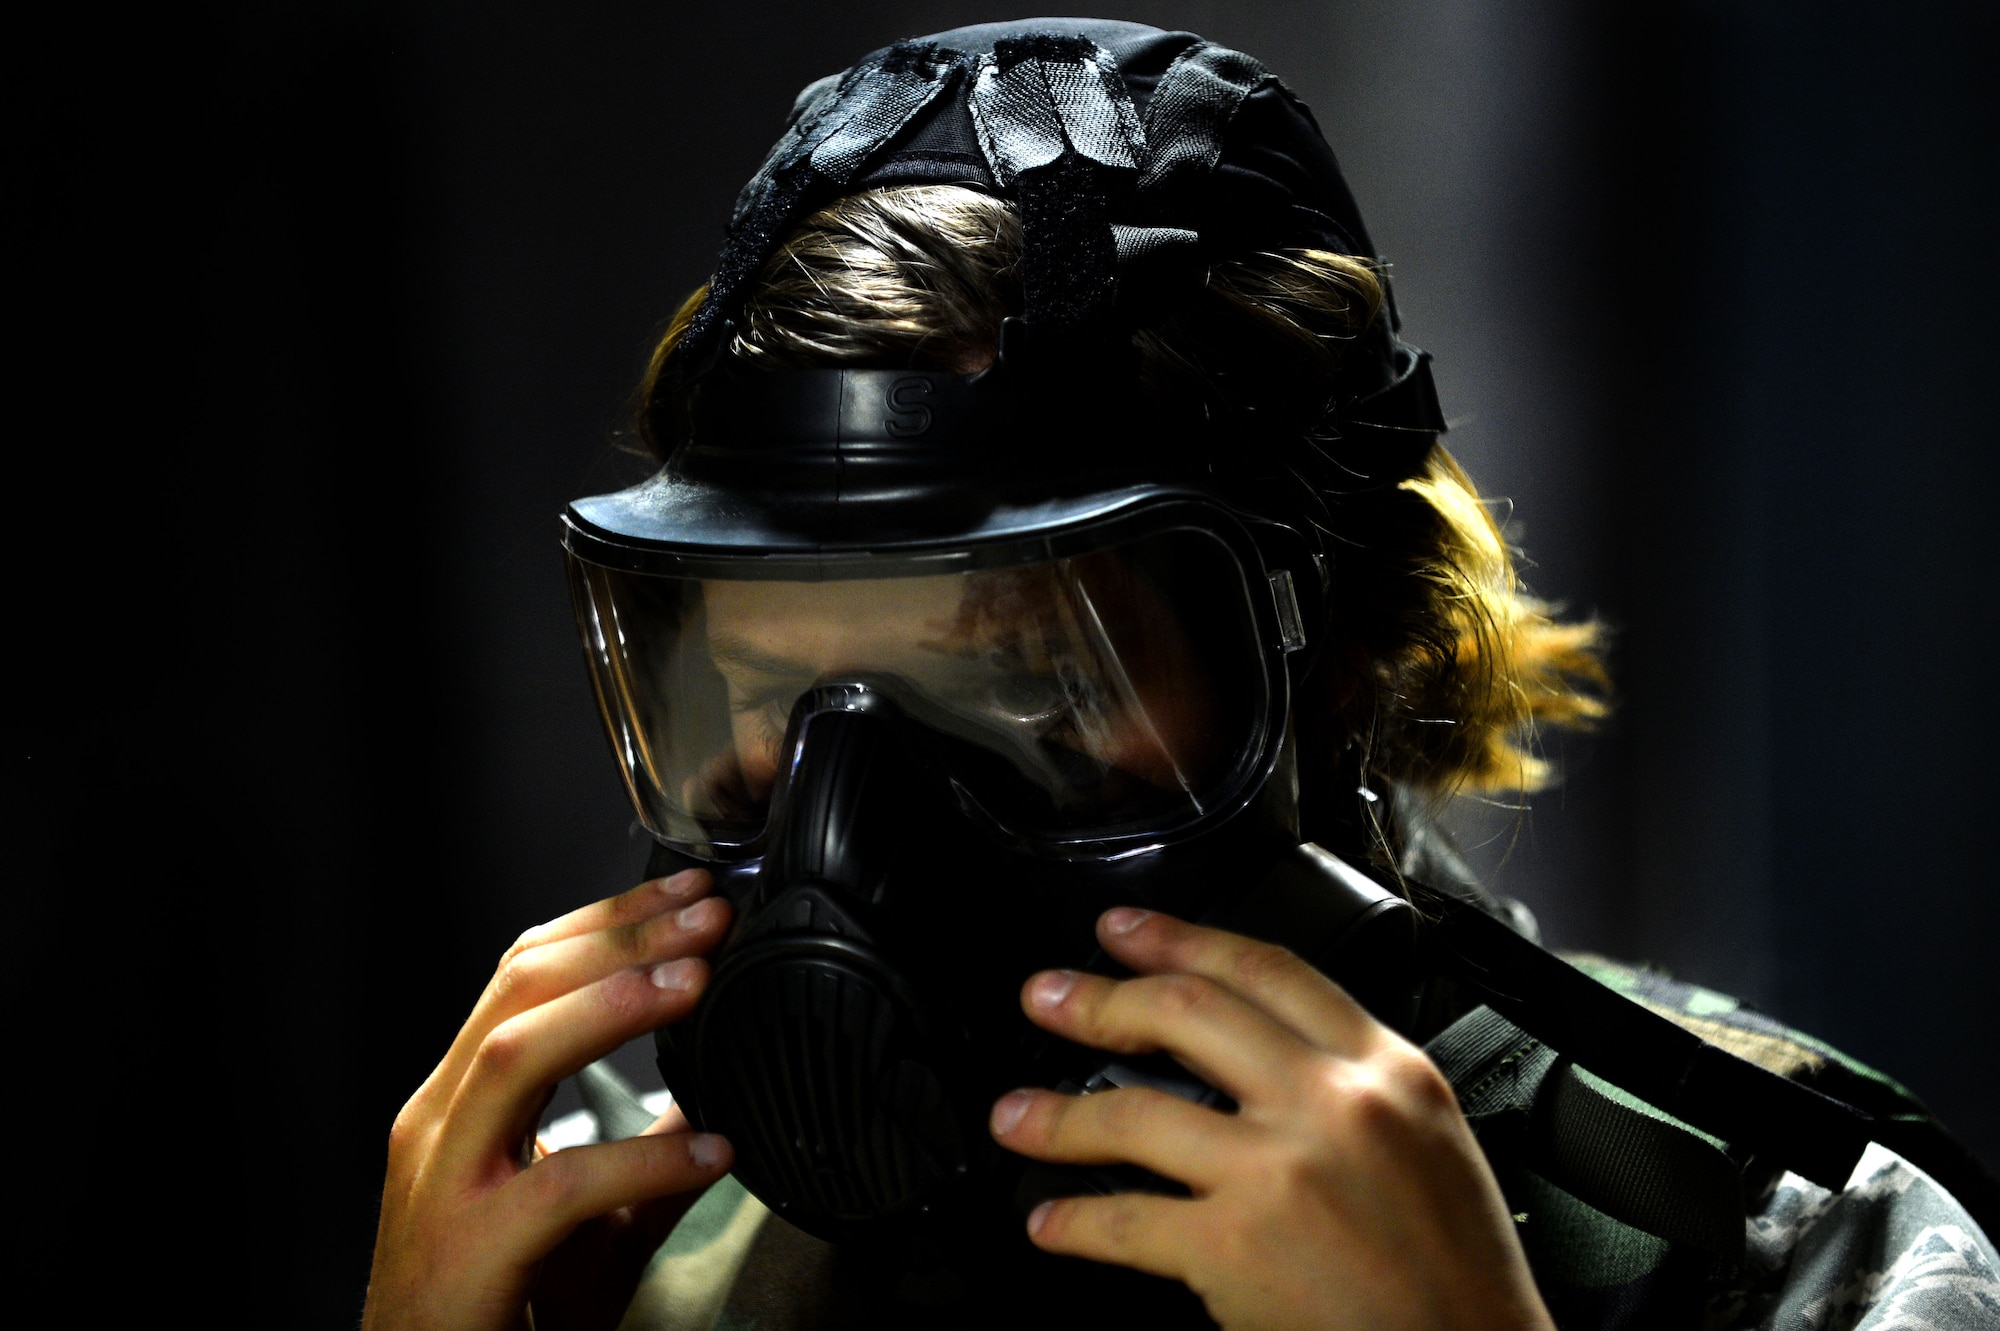 A U.S. Airman puts on her gas mask before firing the M4 carbine during combat arms training at Shaw Air Force Base, S.C., March 8, 2016. During the weapons qualification portion of CATM, students have to shoot their weapons from the prone, kneeling, standing positions, and at times with a gas mask to ensure they are capable of firing from all positions. (U.S. Air Force photo by Senior Airman Michael Cossaboom)